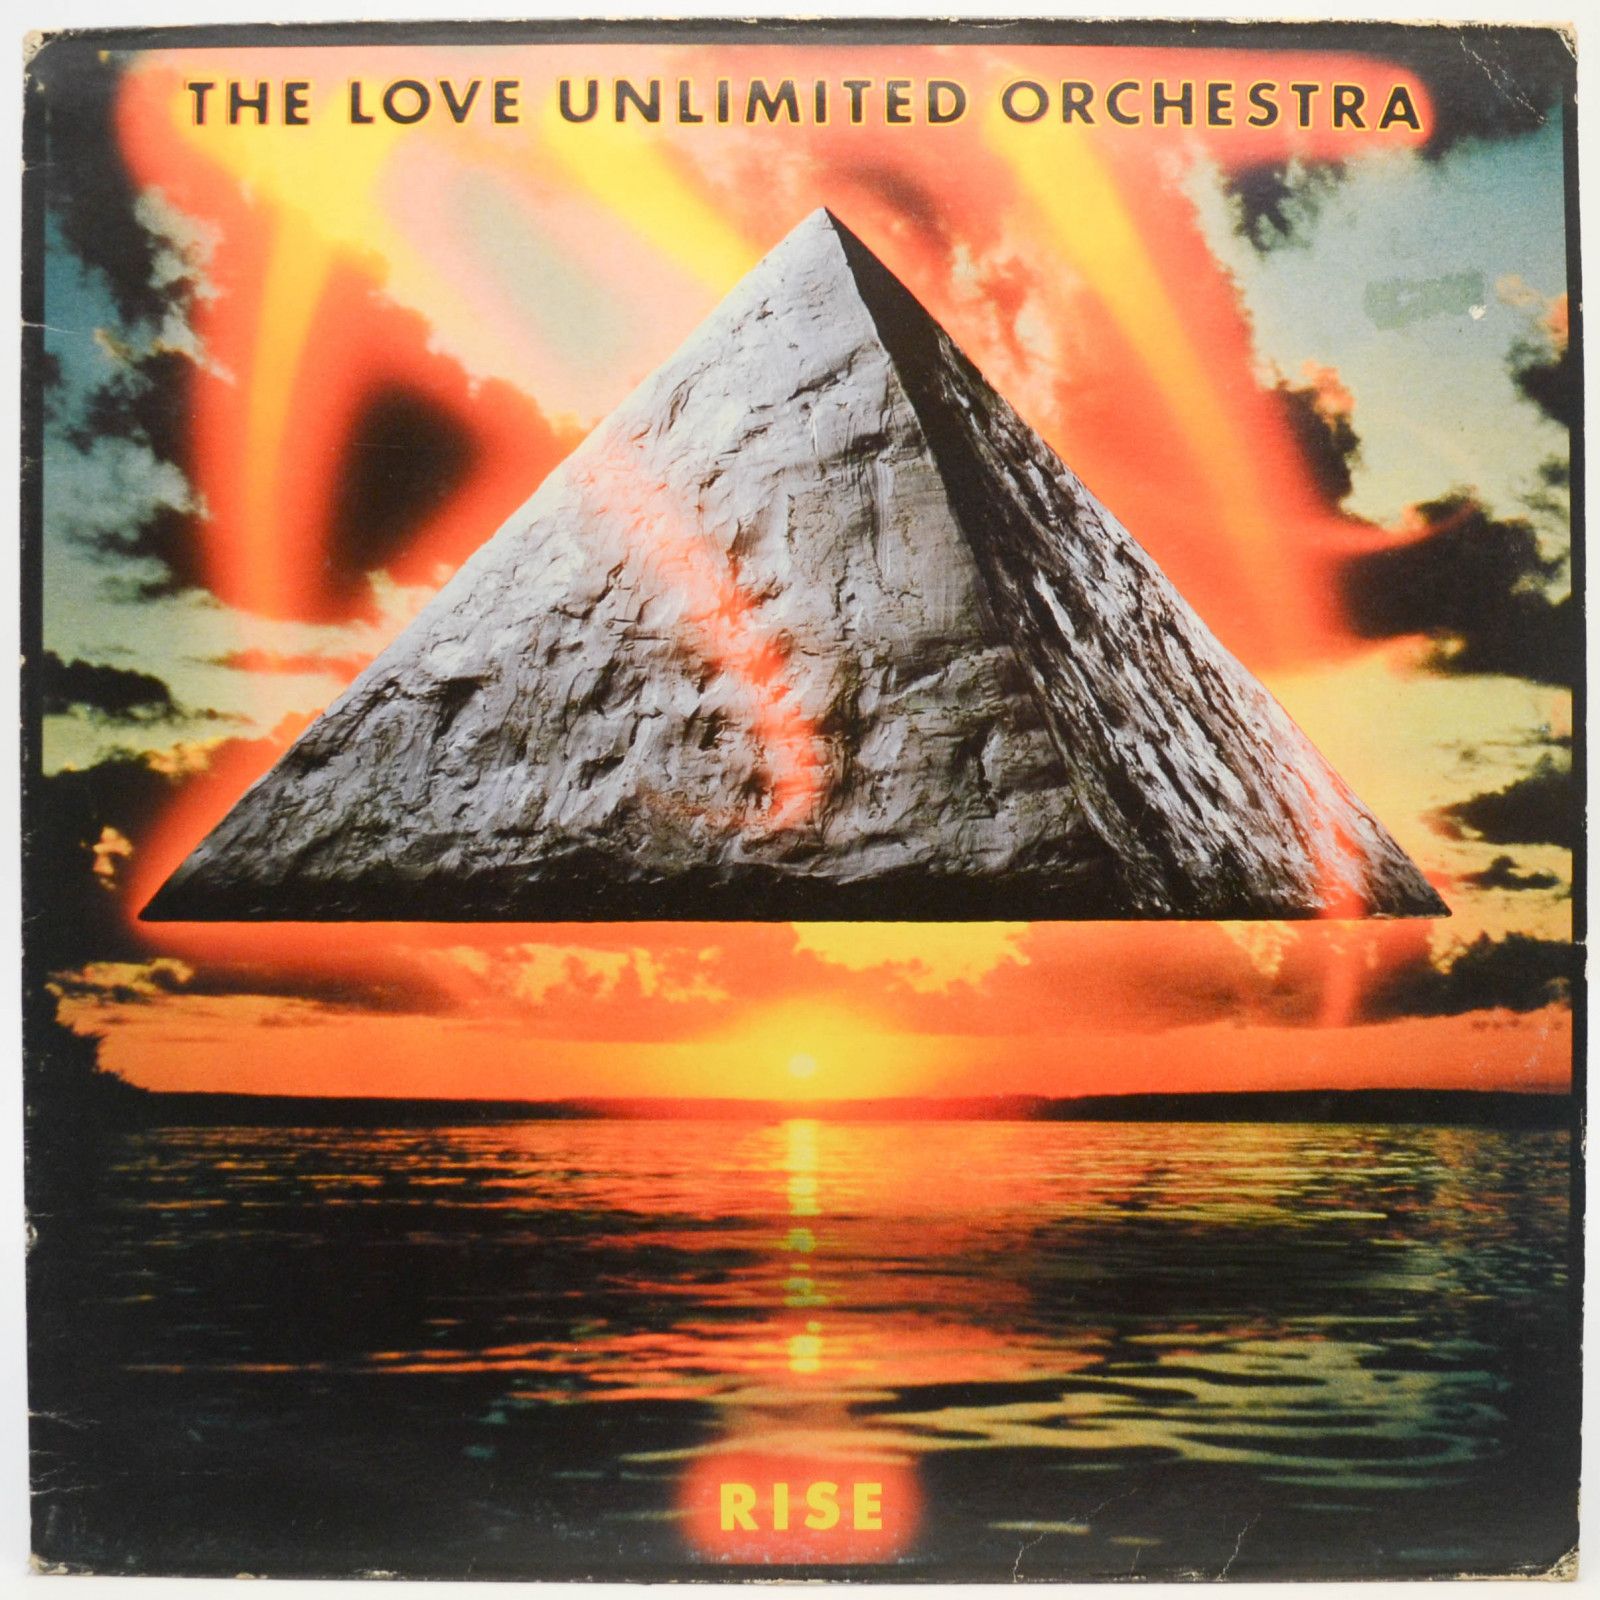 Love Unlimited Orchestra — Rise, 1983